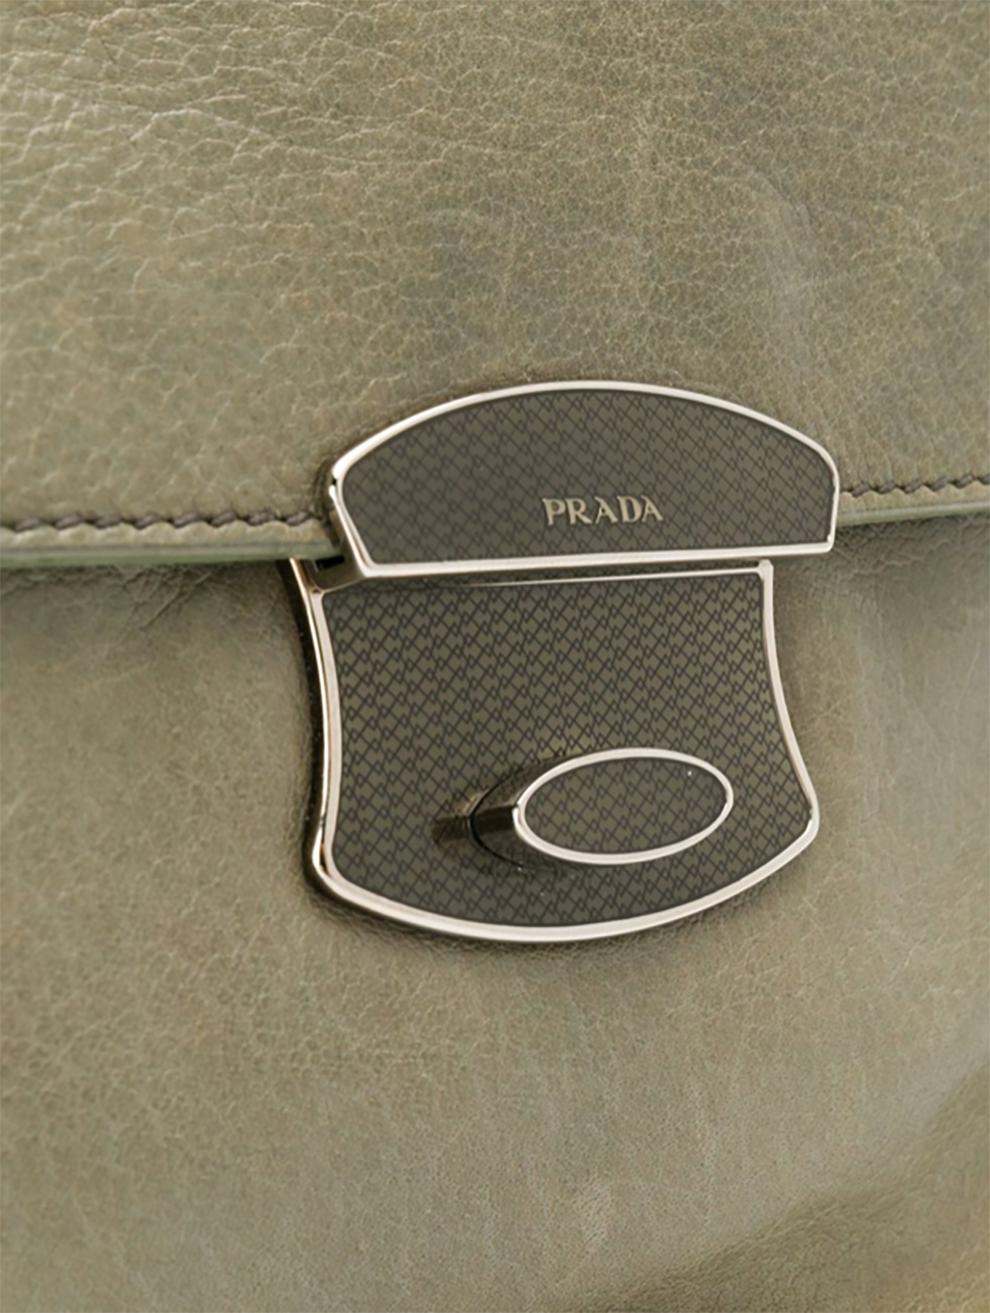 Prada grey green leather chain strap shoulder bag featuring a foldover top with twist-lock closure, a pink logo printed lining, an internal logo plaque, silver-tone hardware and a detachable round-link chain shoulder strap (Handle 19.7in (50cm)).